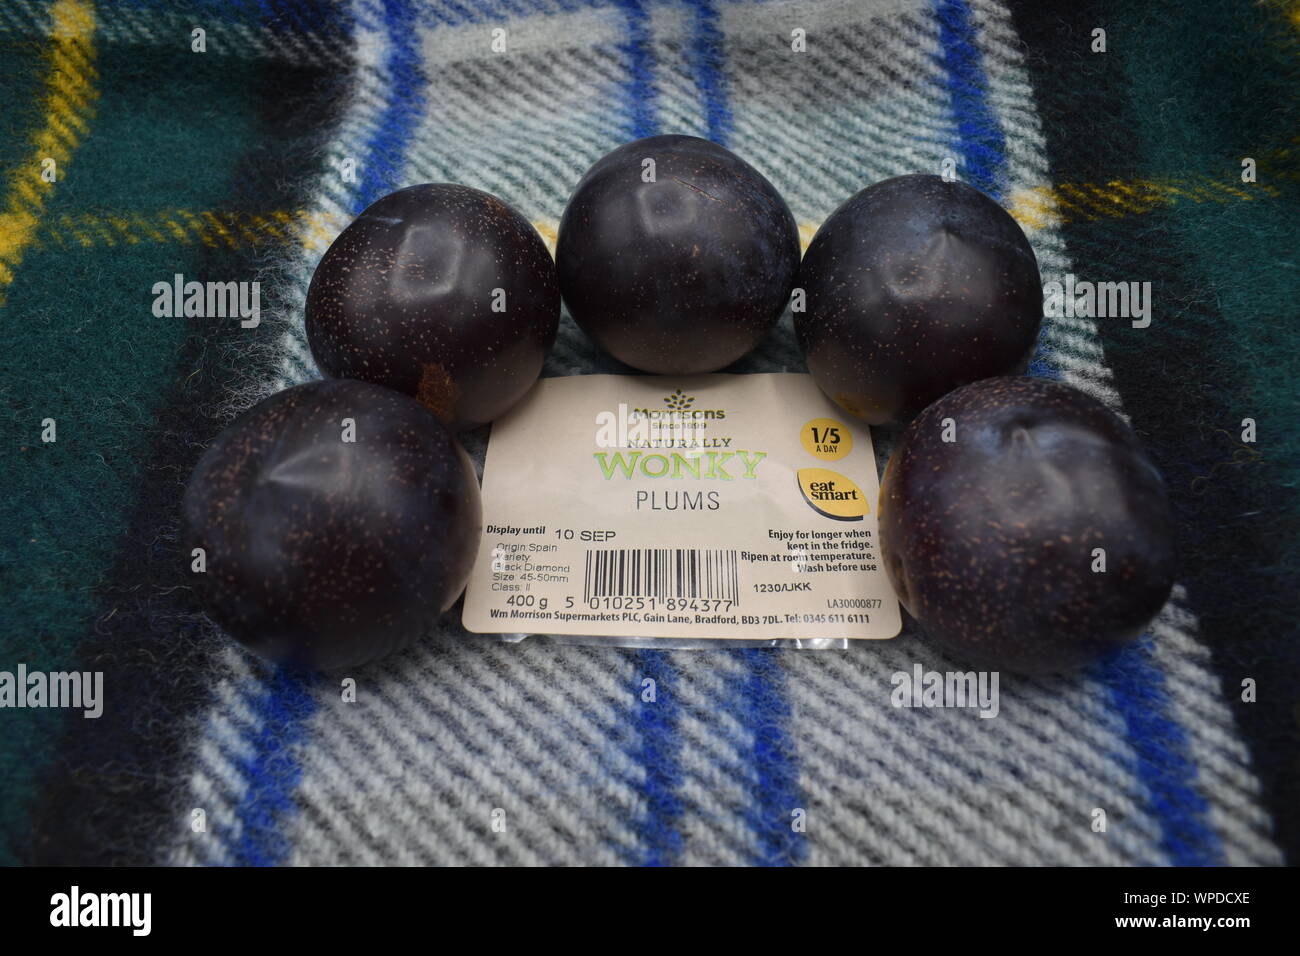 Naturally wonky plums from Morrisons supermarket.  Selling plums which would normally be considered unsuitable for sale cuts food waste. Stock Photo